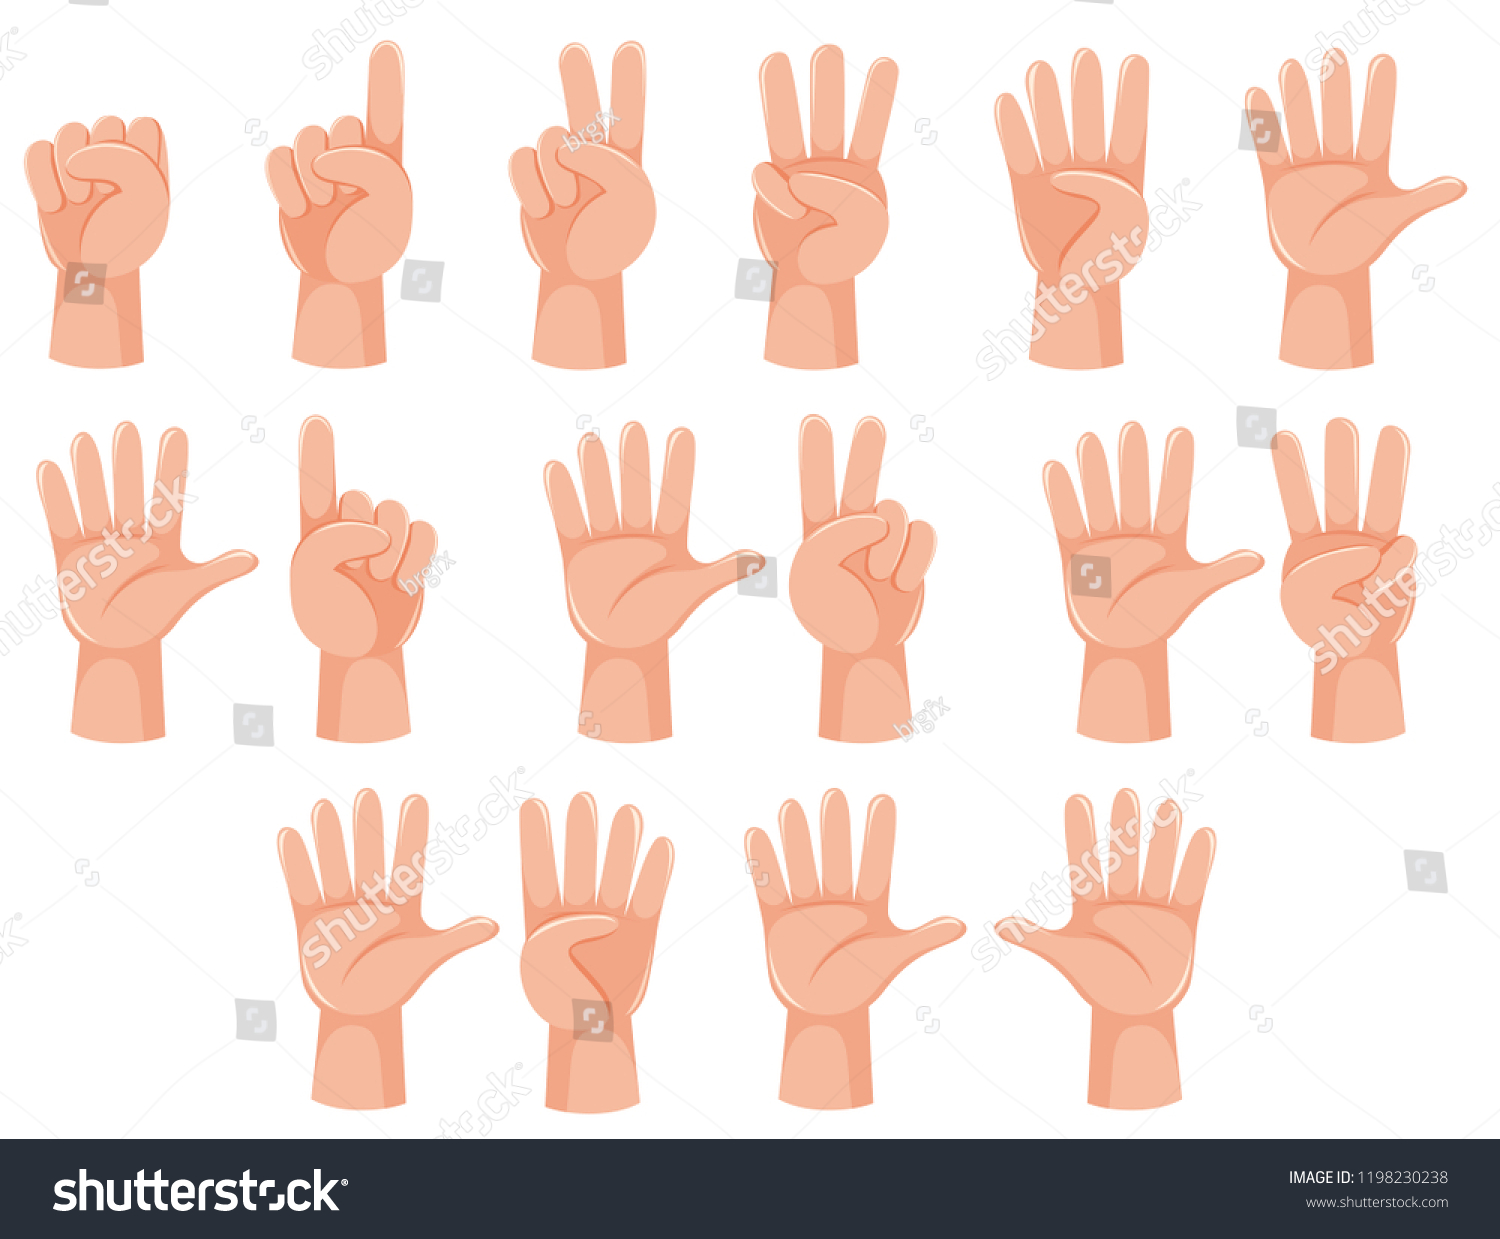 Human Hand Number Gesture Illustration Stock Vector (Royalty Free ...